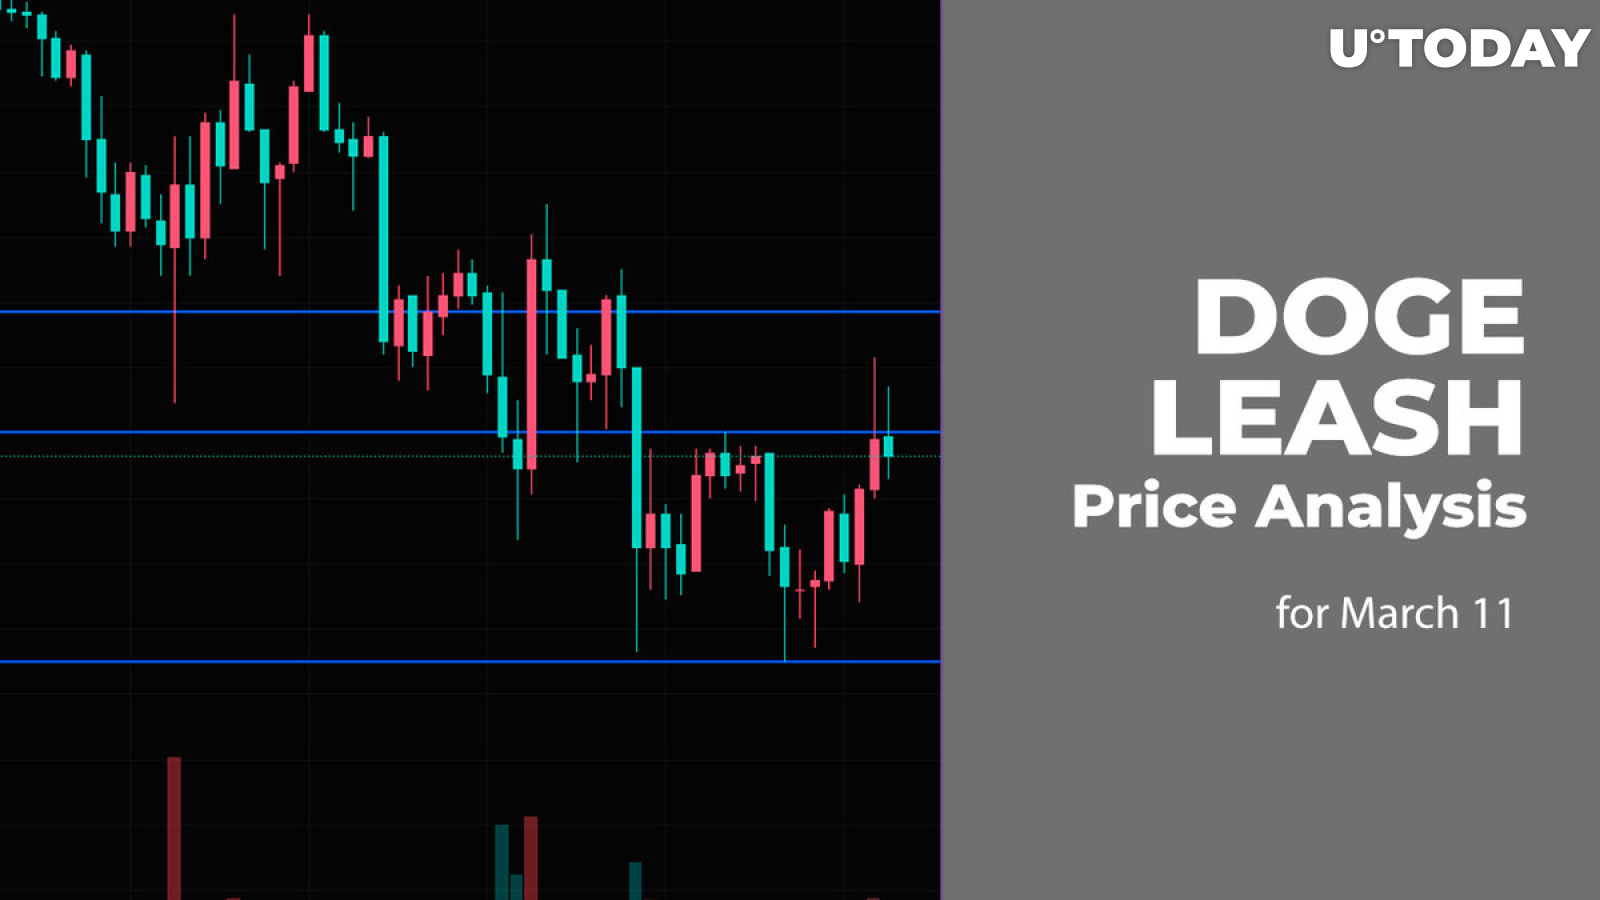 DOGE and LEASH Price Analysis for March 11